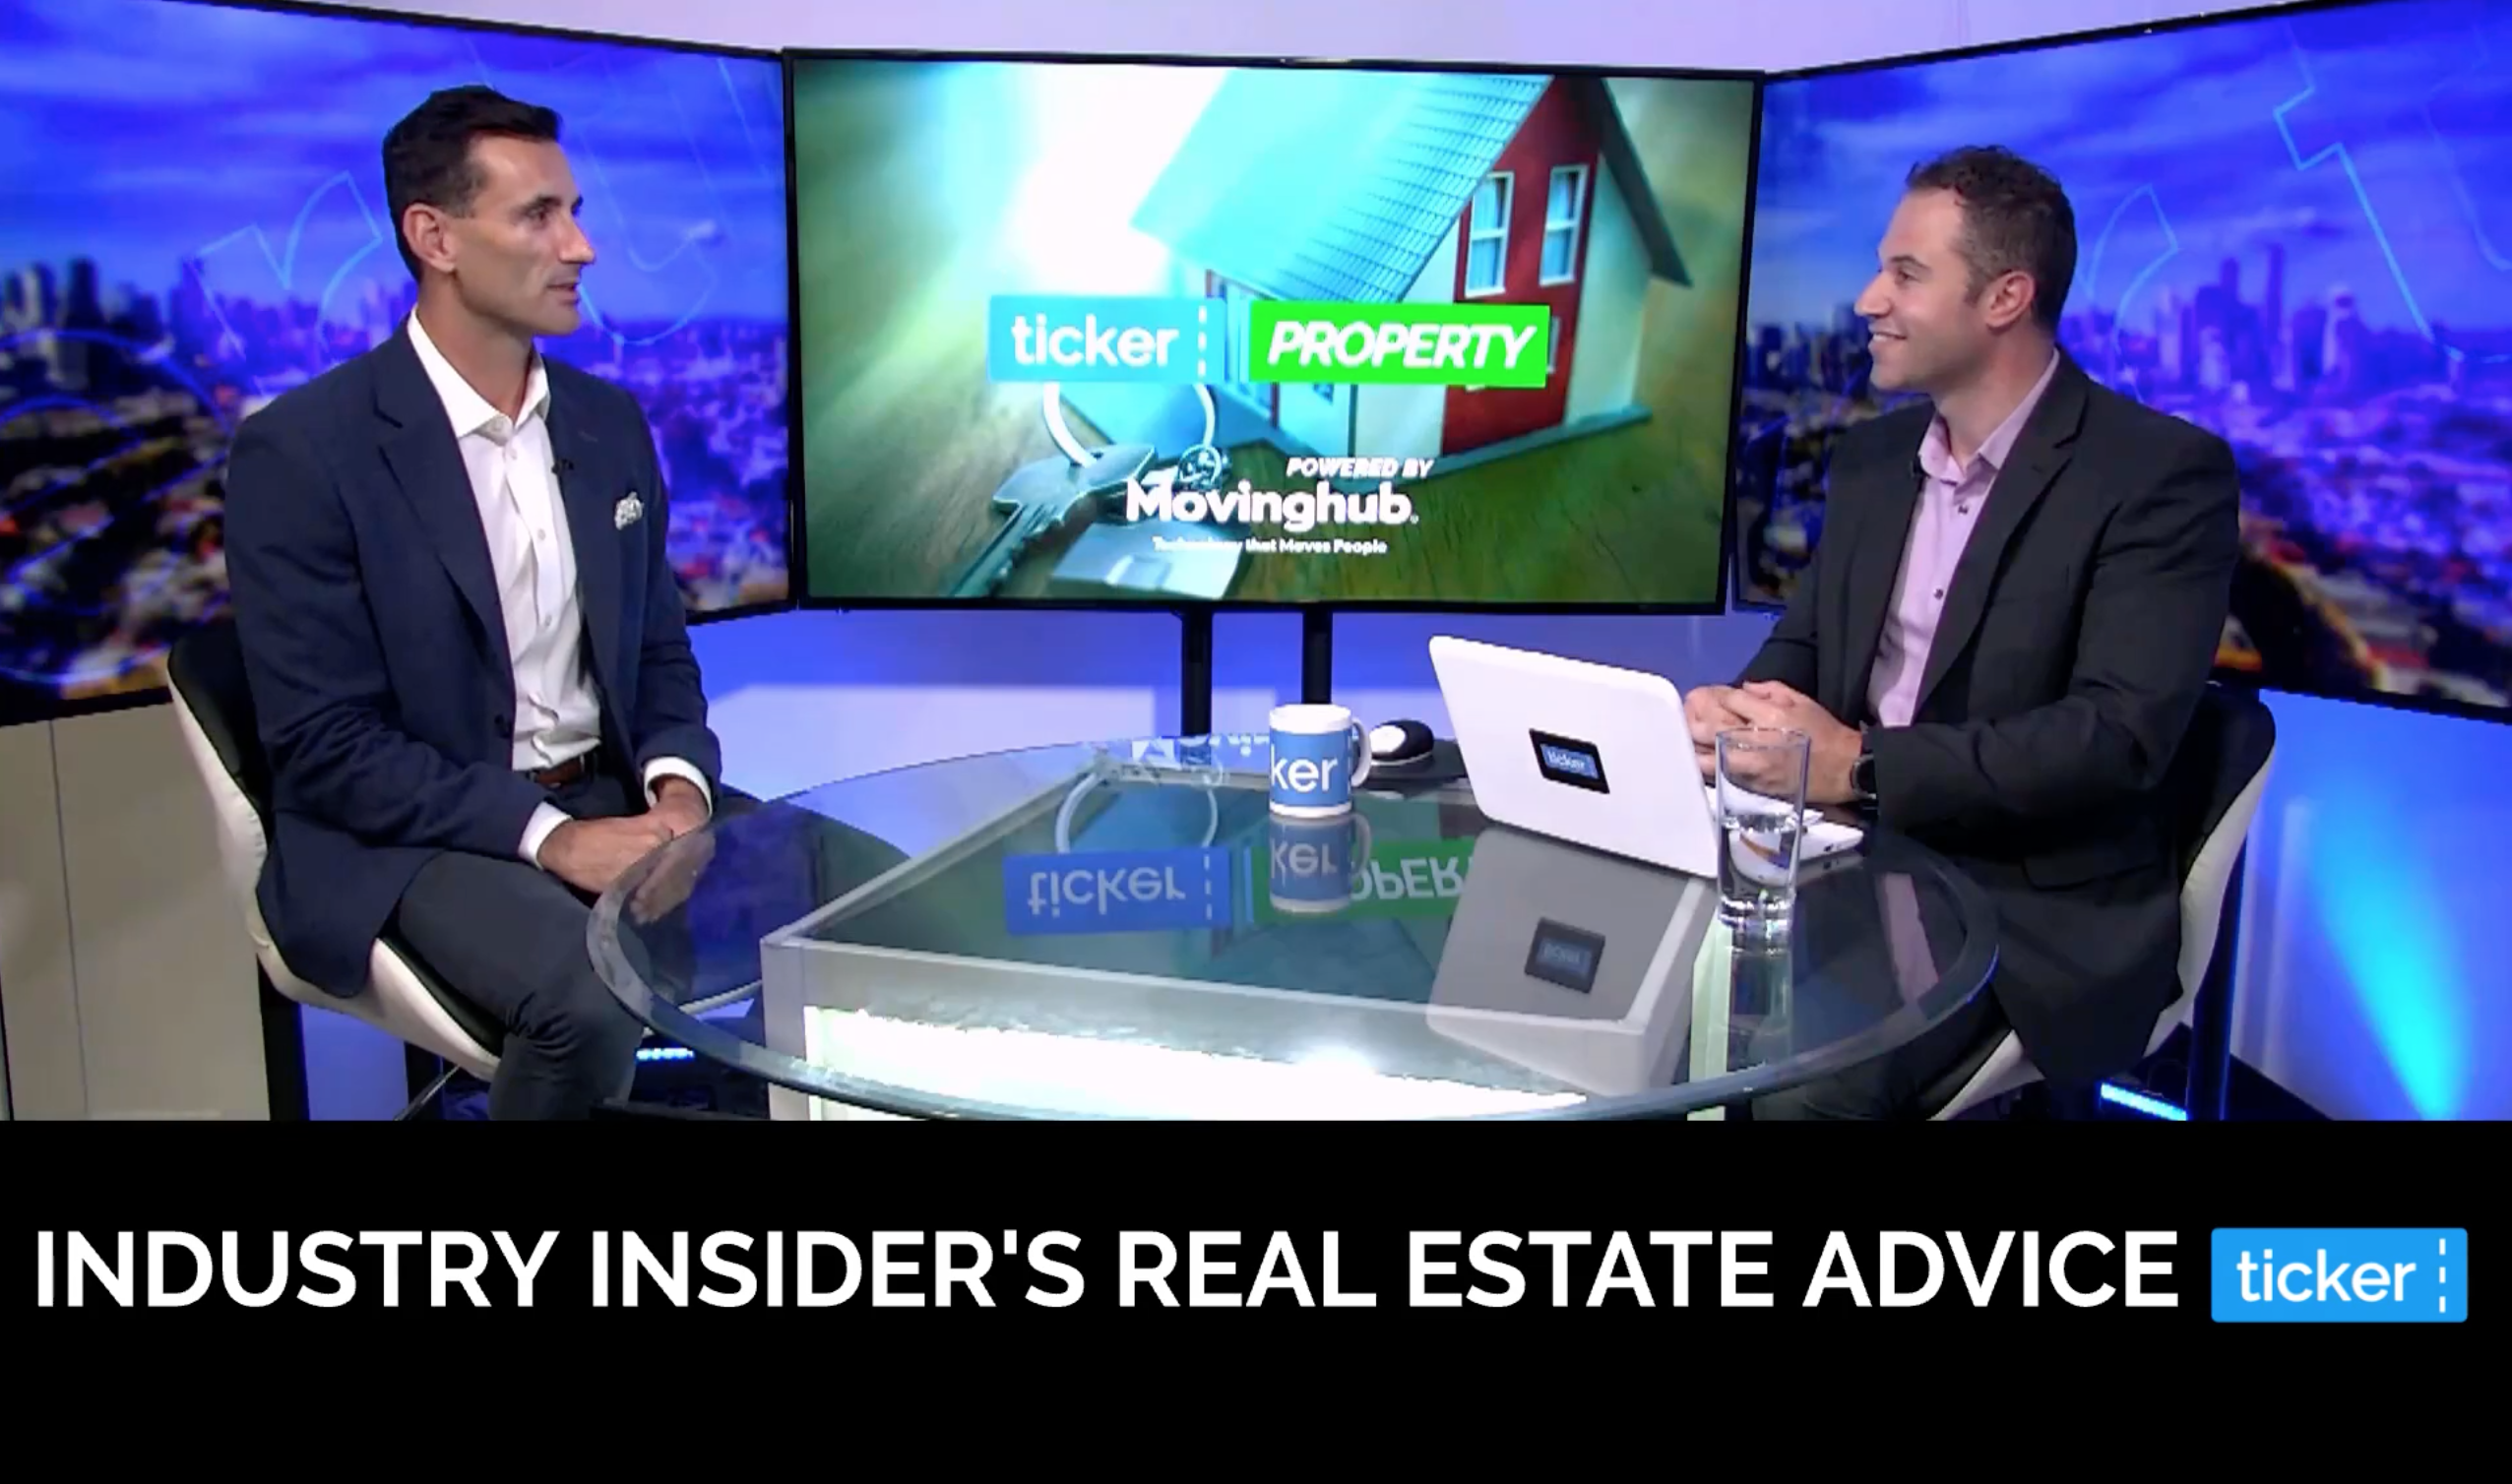 Two men sitting around a table discussing property investment advice